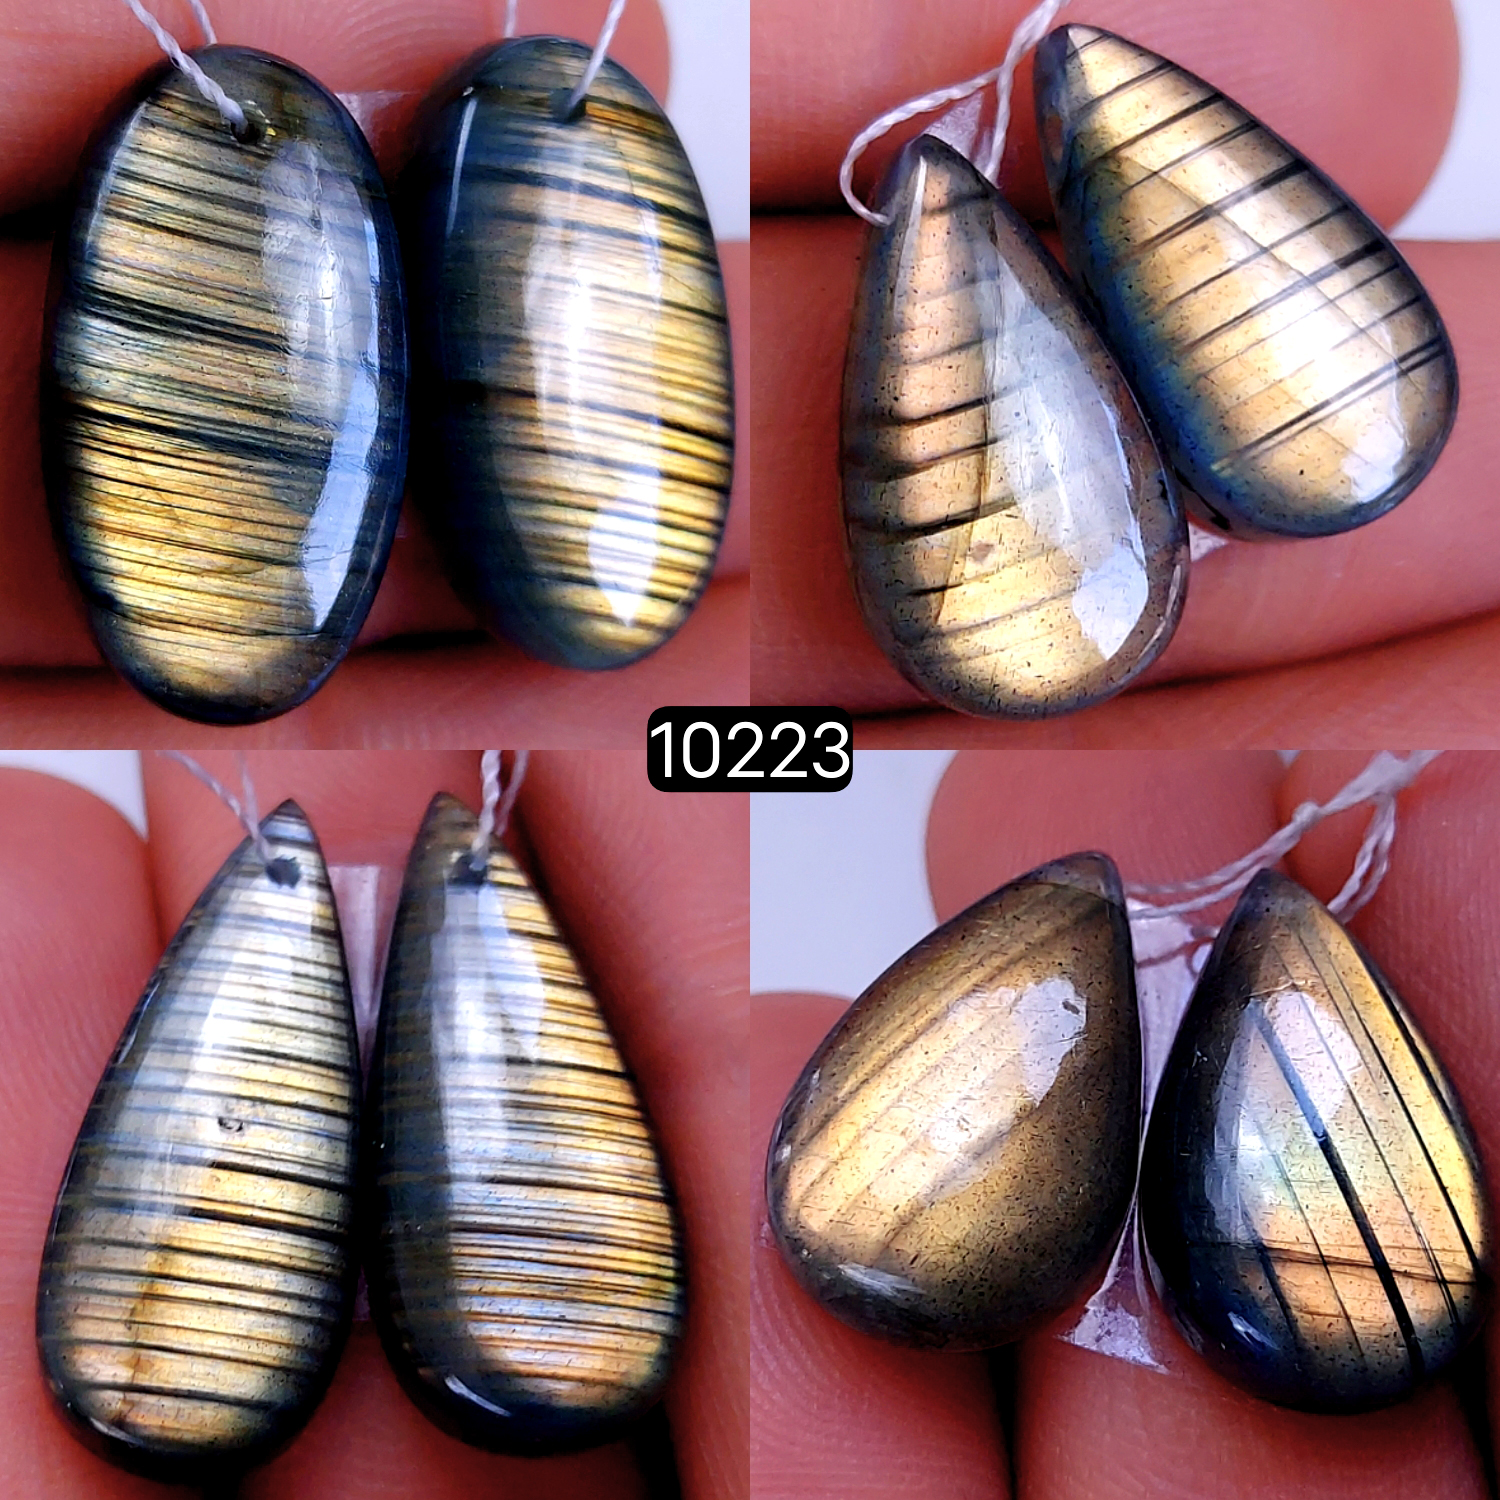 4Pair 110Cts Natural Labradorite Crystal Drill Dangle Drop Earring Pairs Silver Earrings Blue Labradorite Hoop Jewelry  26x14 20x12mm #10223